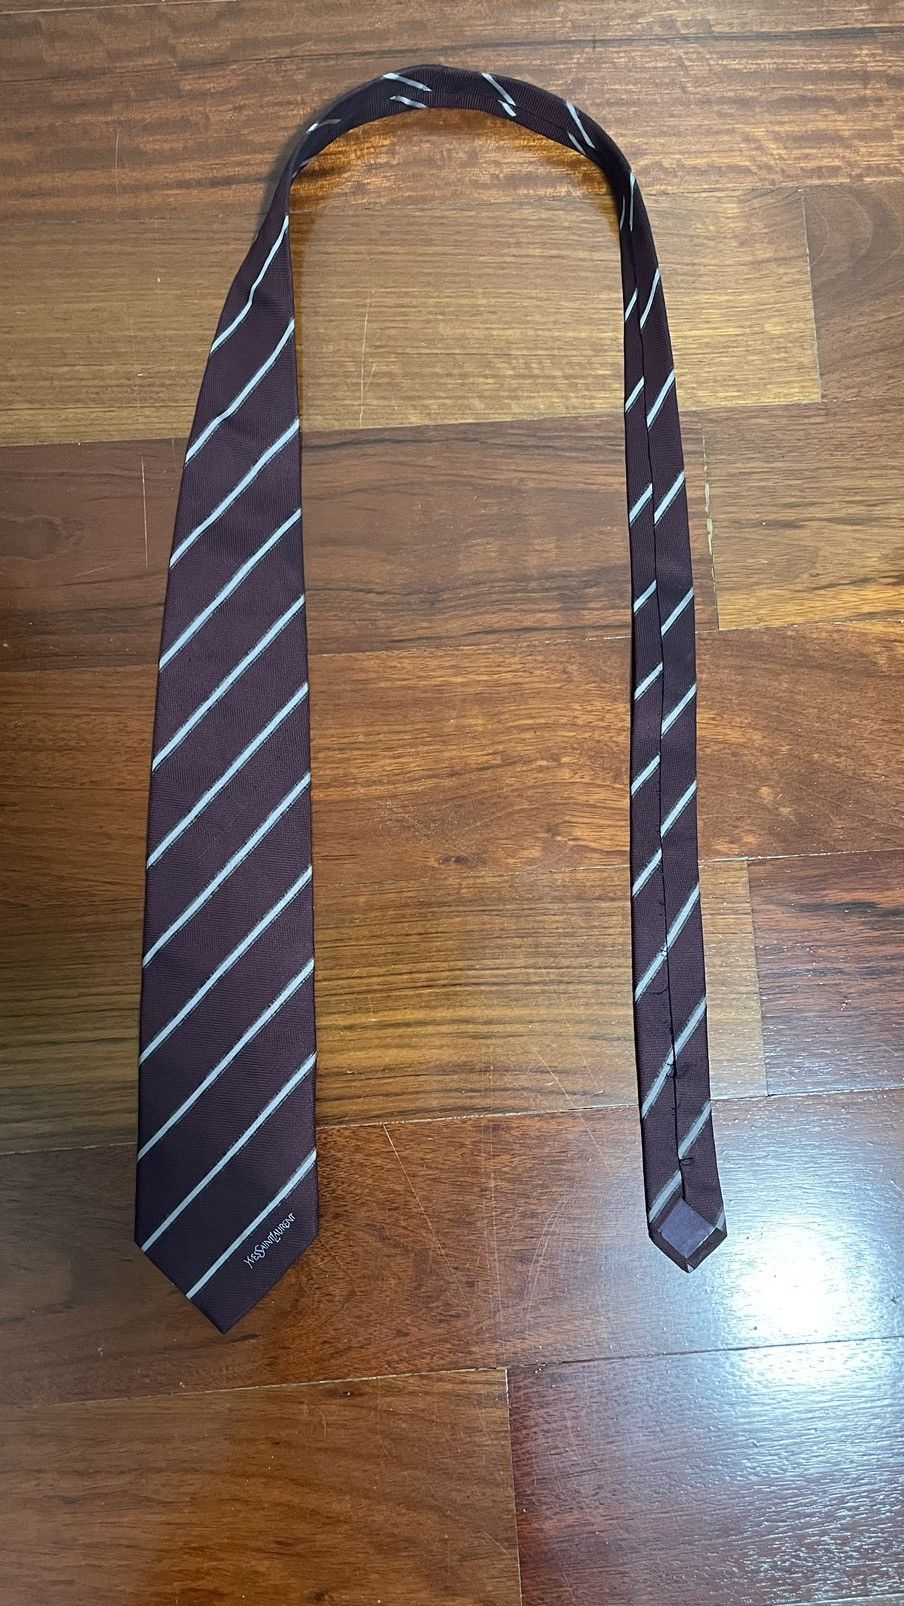 Yves Saint Laurent YSL Burgundy Tie Size ONE SIZE - 2 Preview